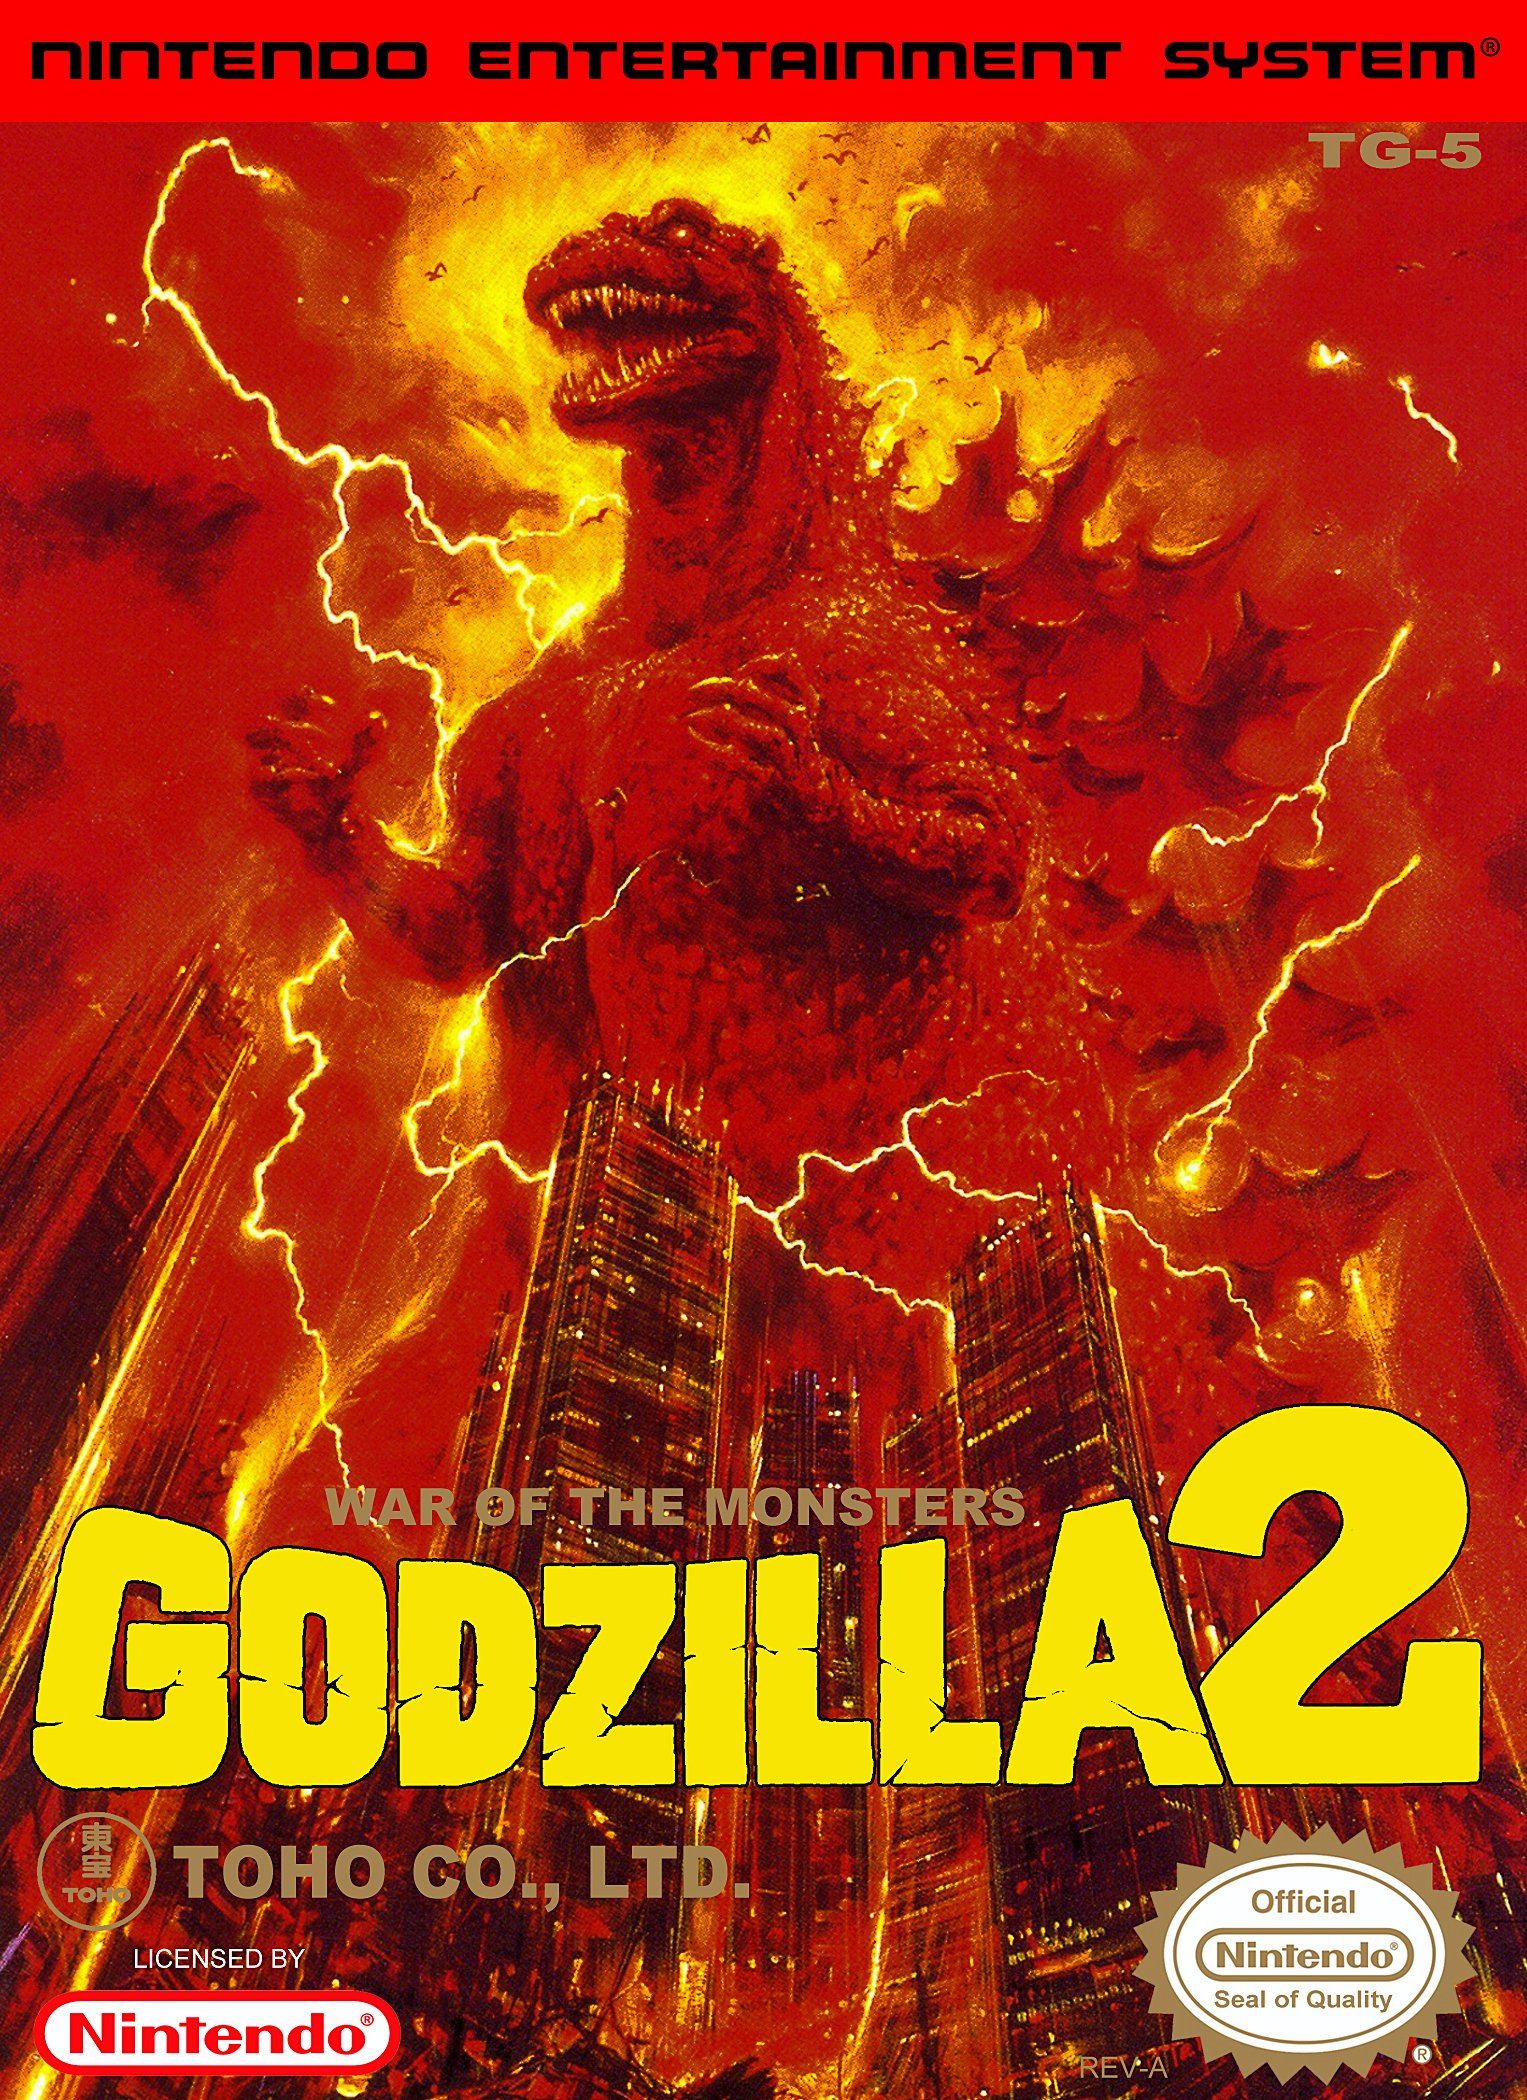 Image of Godzilla 2: War of the Monsters